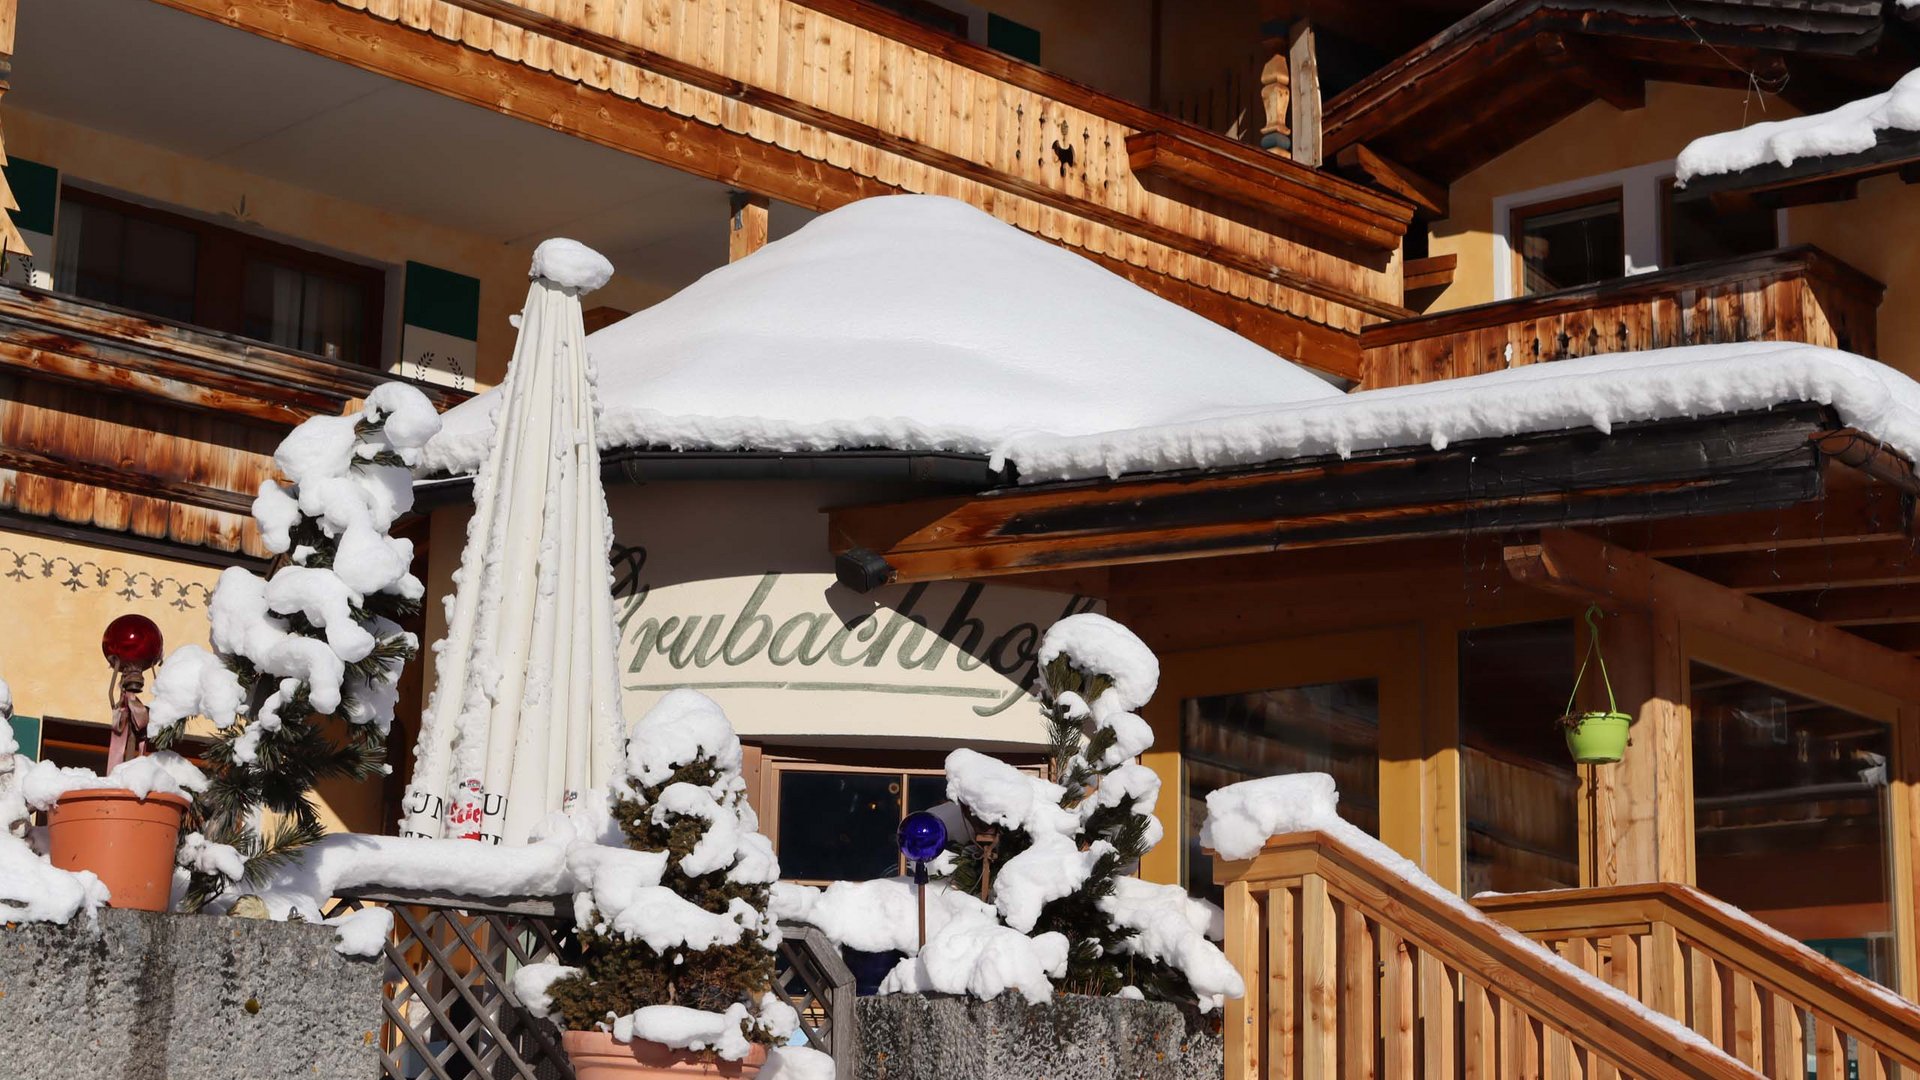 Eco hotel in Tyrol: welcome to Grubacher!